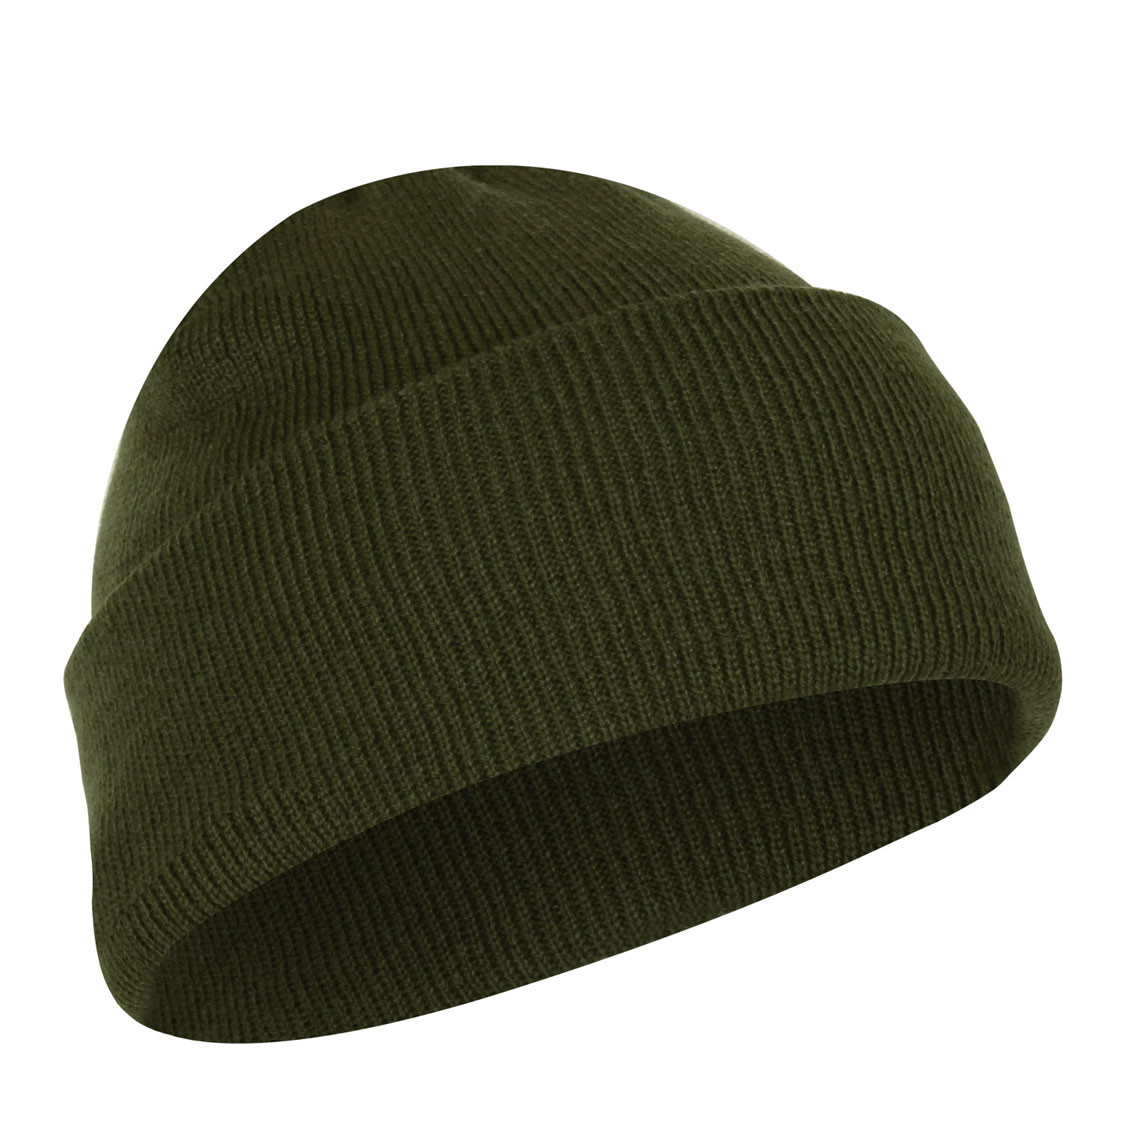 Shop Army Olive Deluxe Knit Watch Caps - Fatigues Army Navy Gear